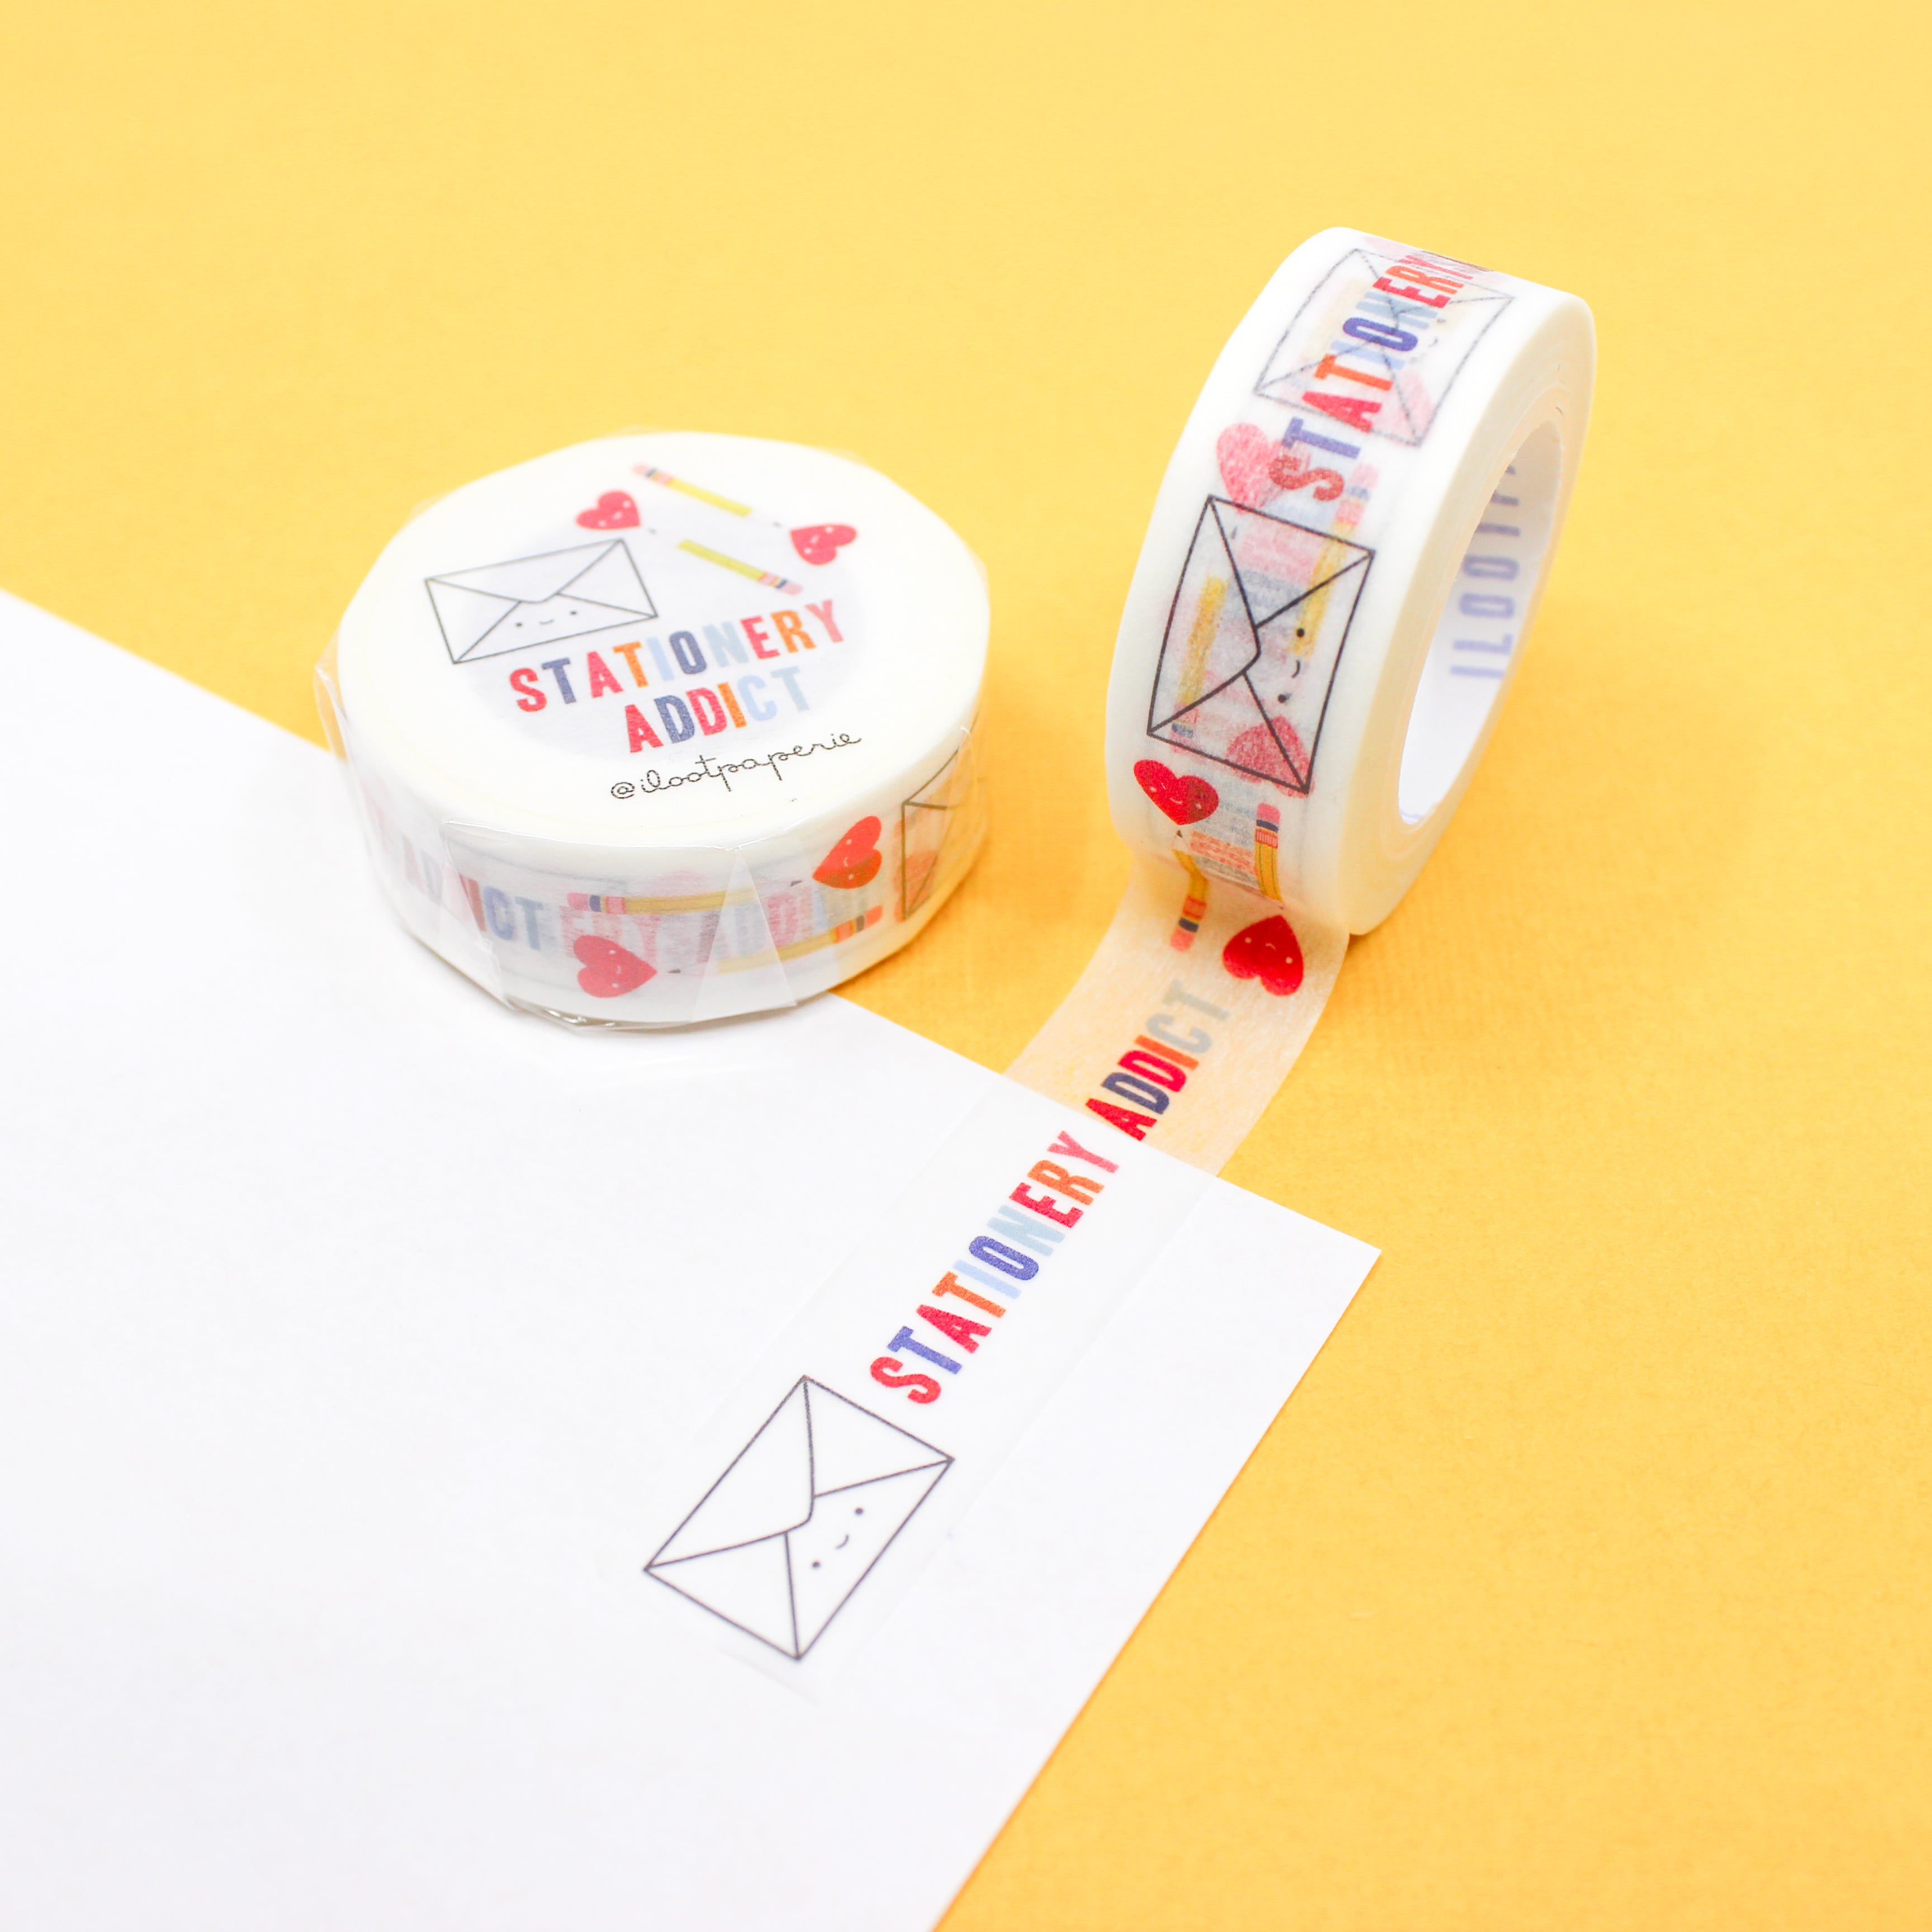 This is a cute stationery addict washi tape from BBB Supplies Craft Shop